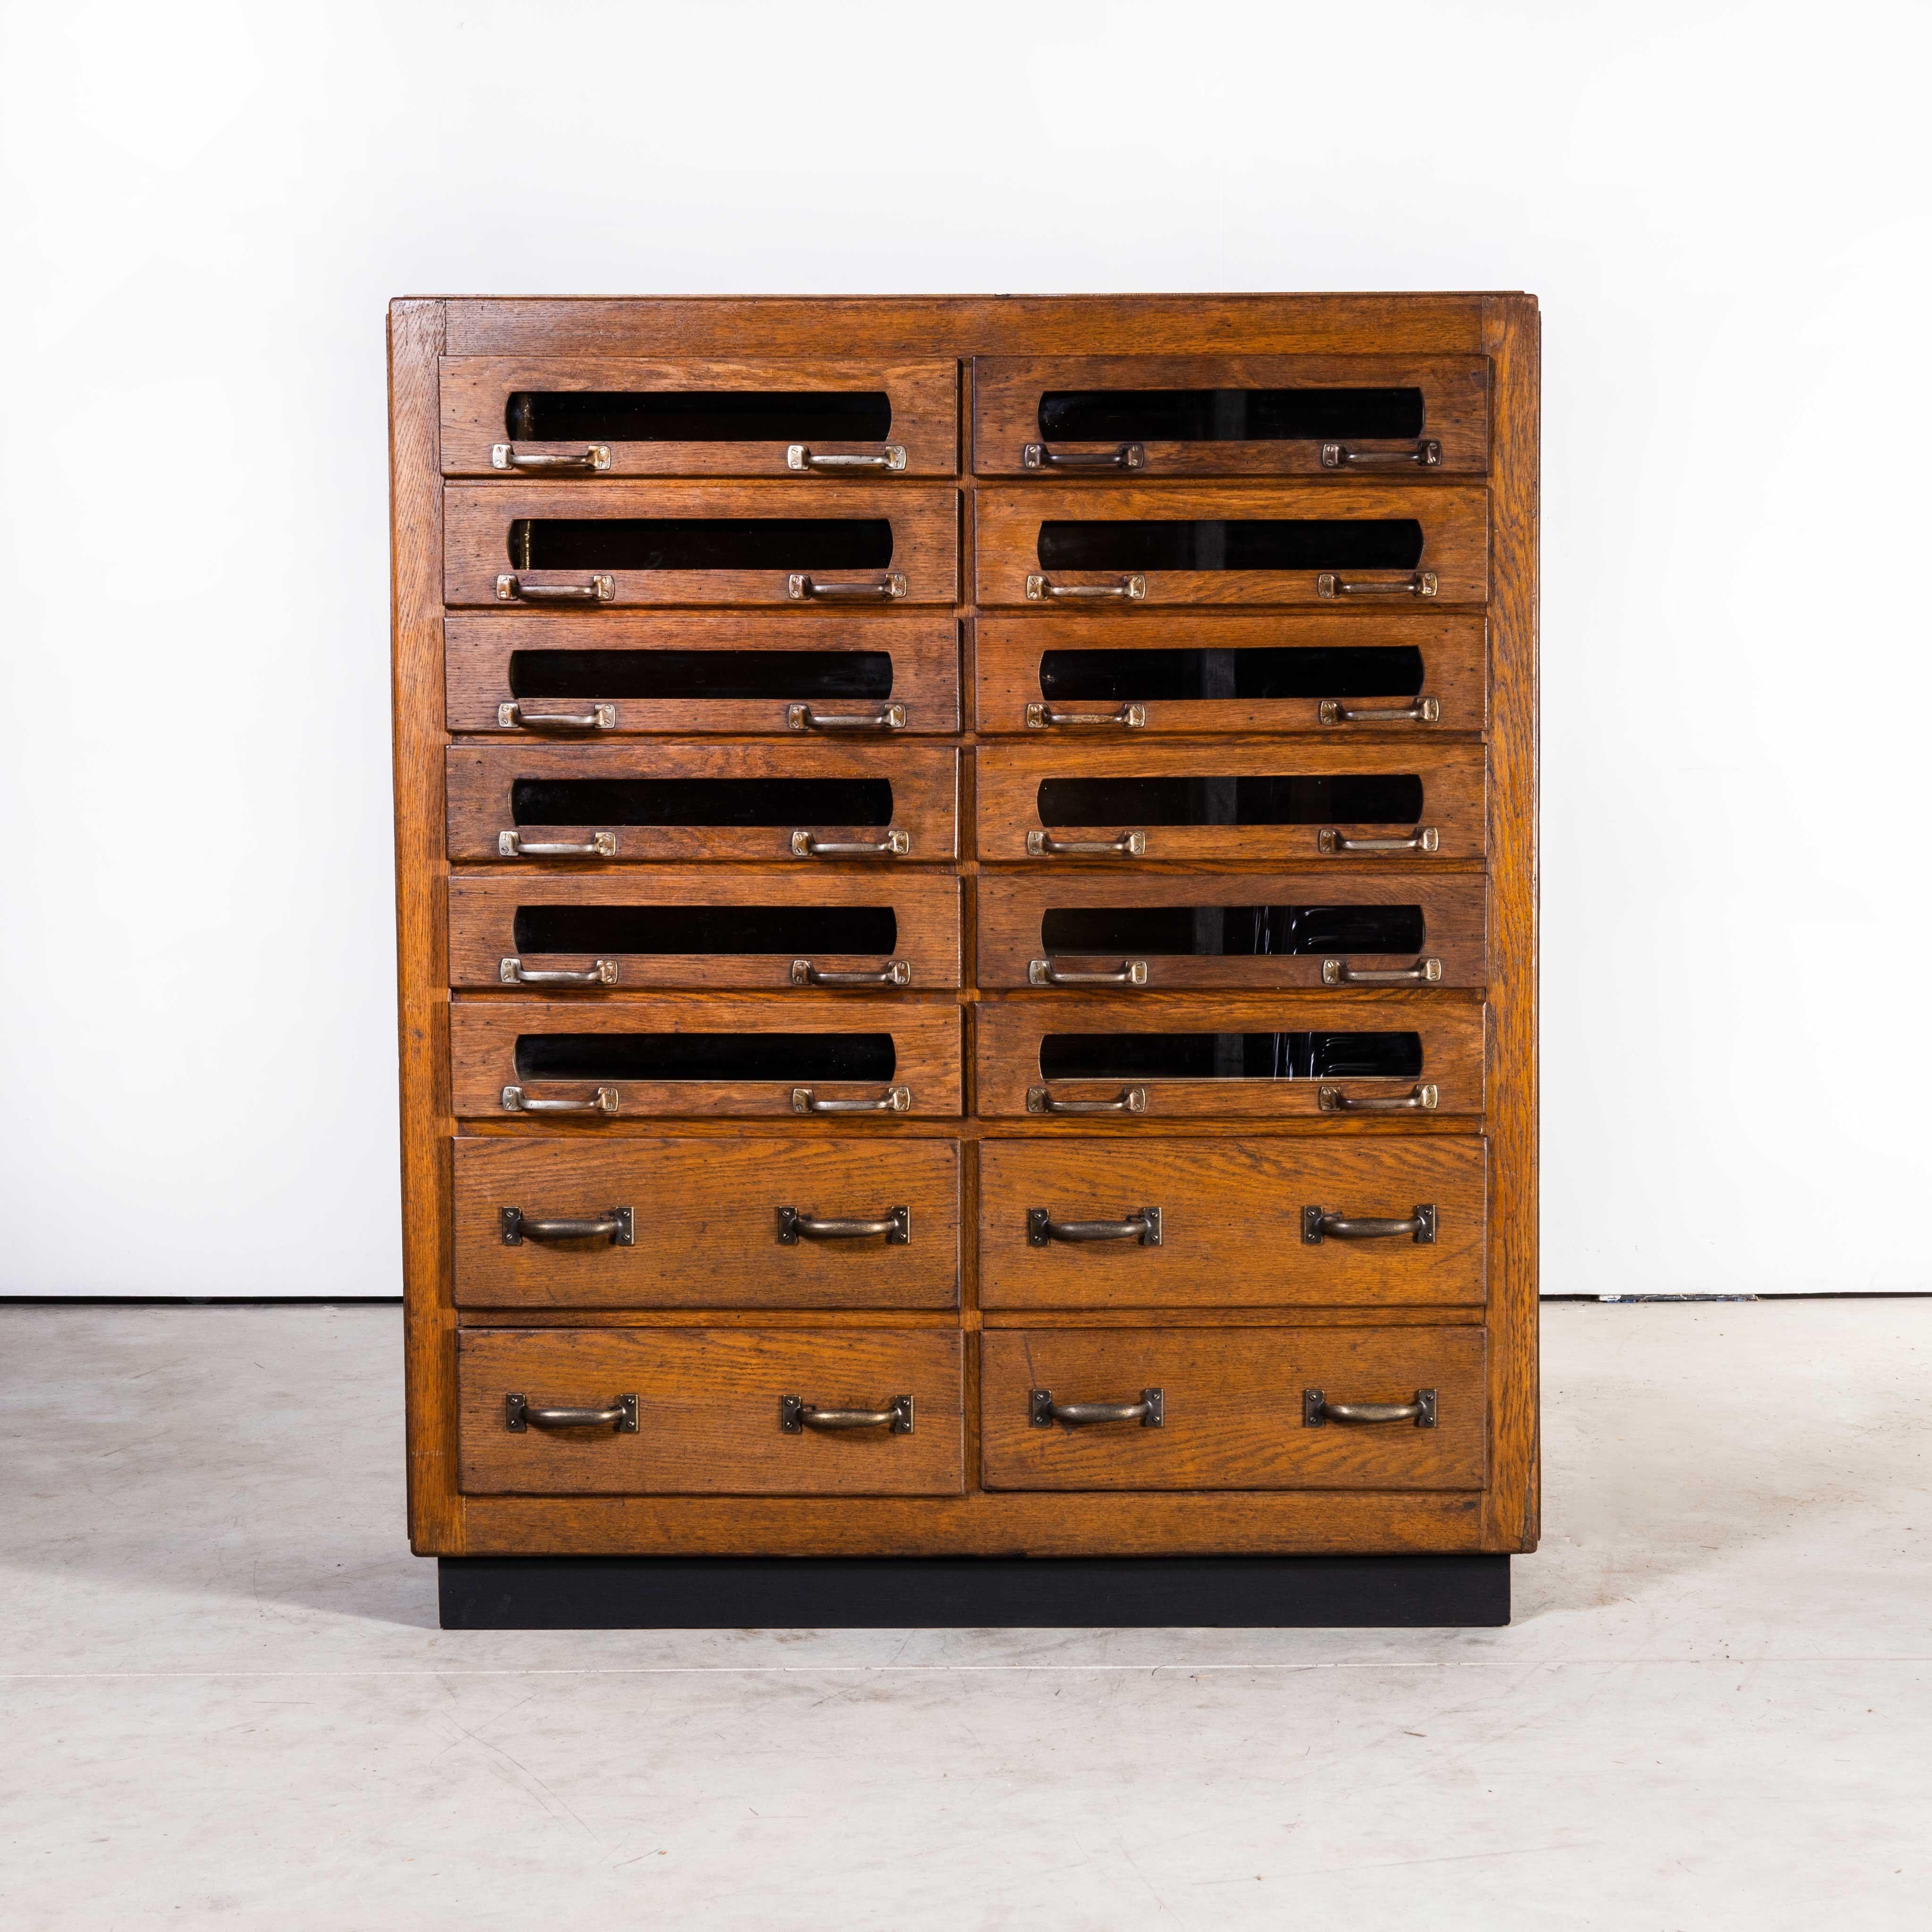 1950’s Belgian Haberdashery cabinet – sixteen drawers
1950’s Belgian Haberdashery cabinet – sixteen drawers. Sourced in Belgium this is a well proportioned unusual upright bank of haberdashery drawers most likely from a milliners. The cabinet is